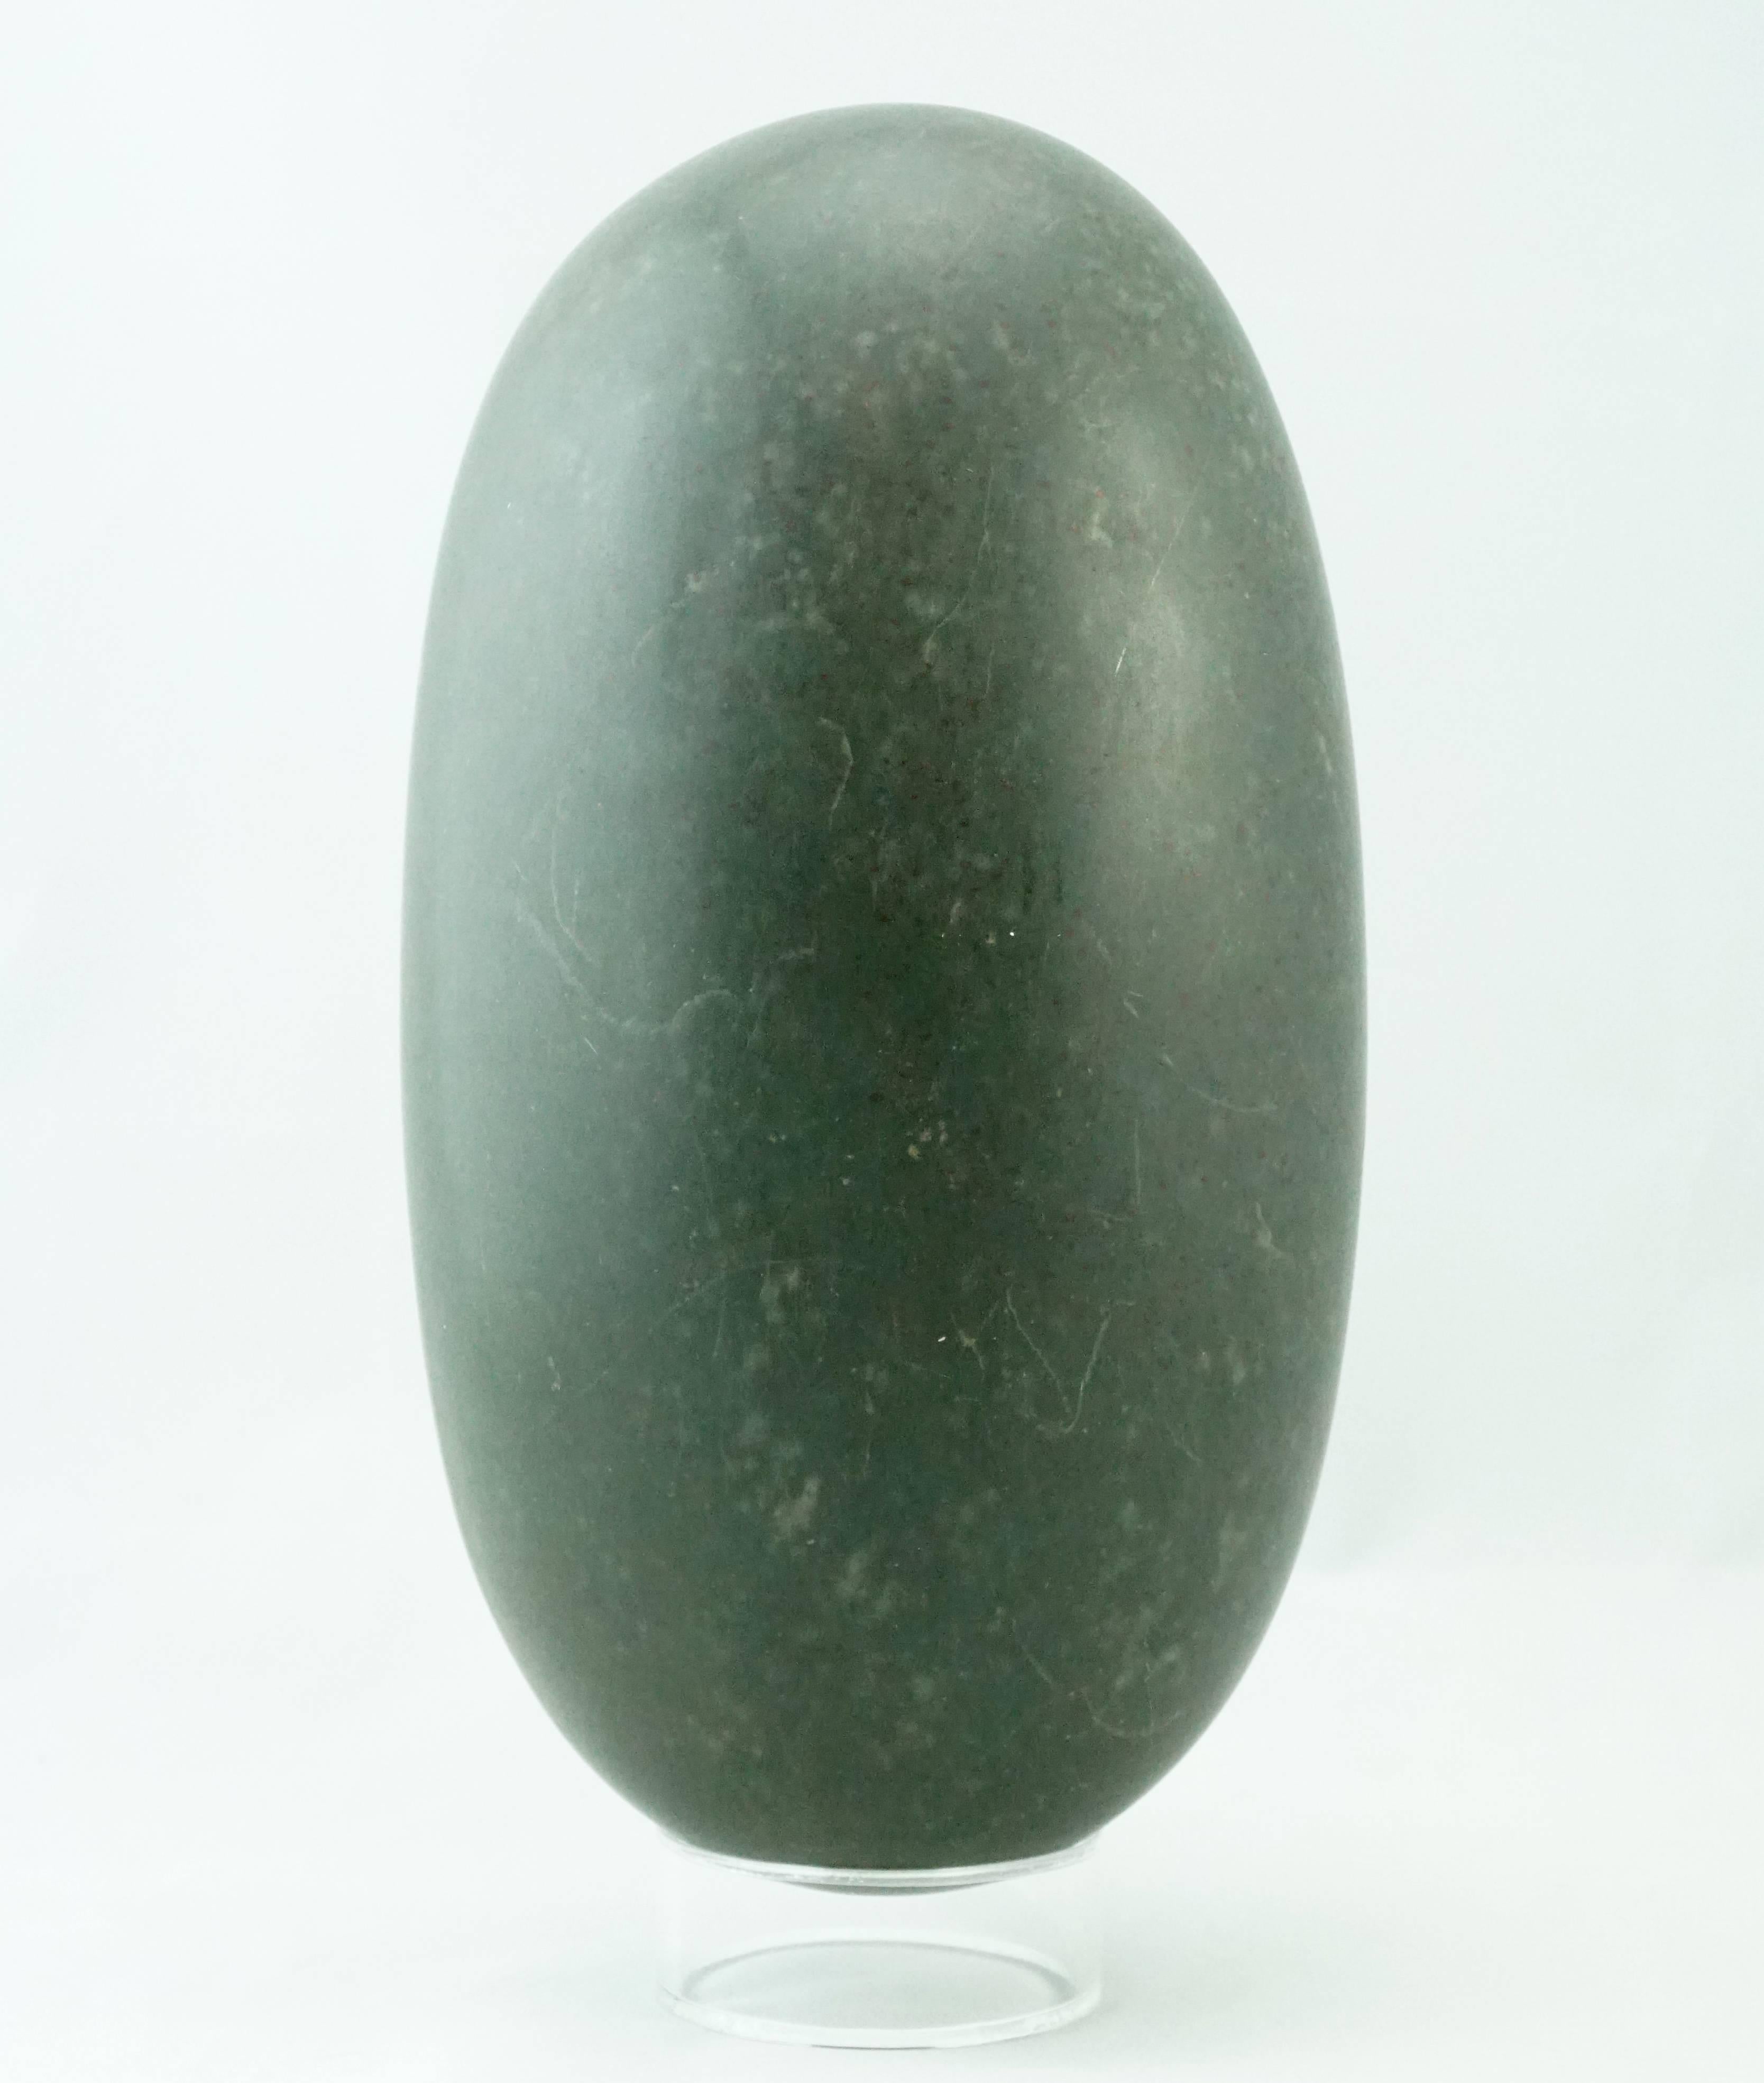 This magnificent lingam stone has a natural bird on Lilly Pads design that is very special. Please view photos. Stand included.

One of the most sacred icons of ancient and modern times, Shiva Lingam stones are found only in the Narmada River in the